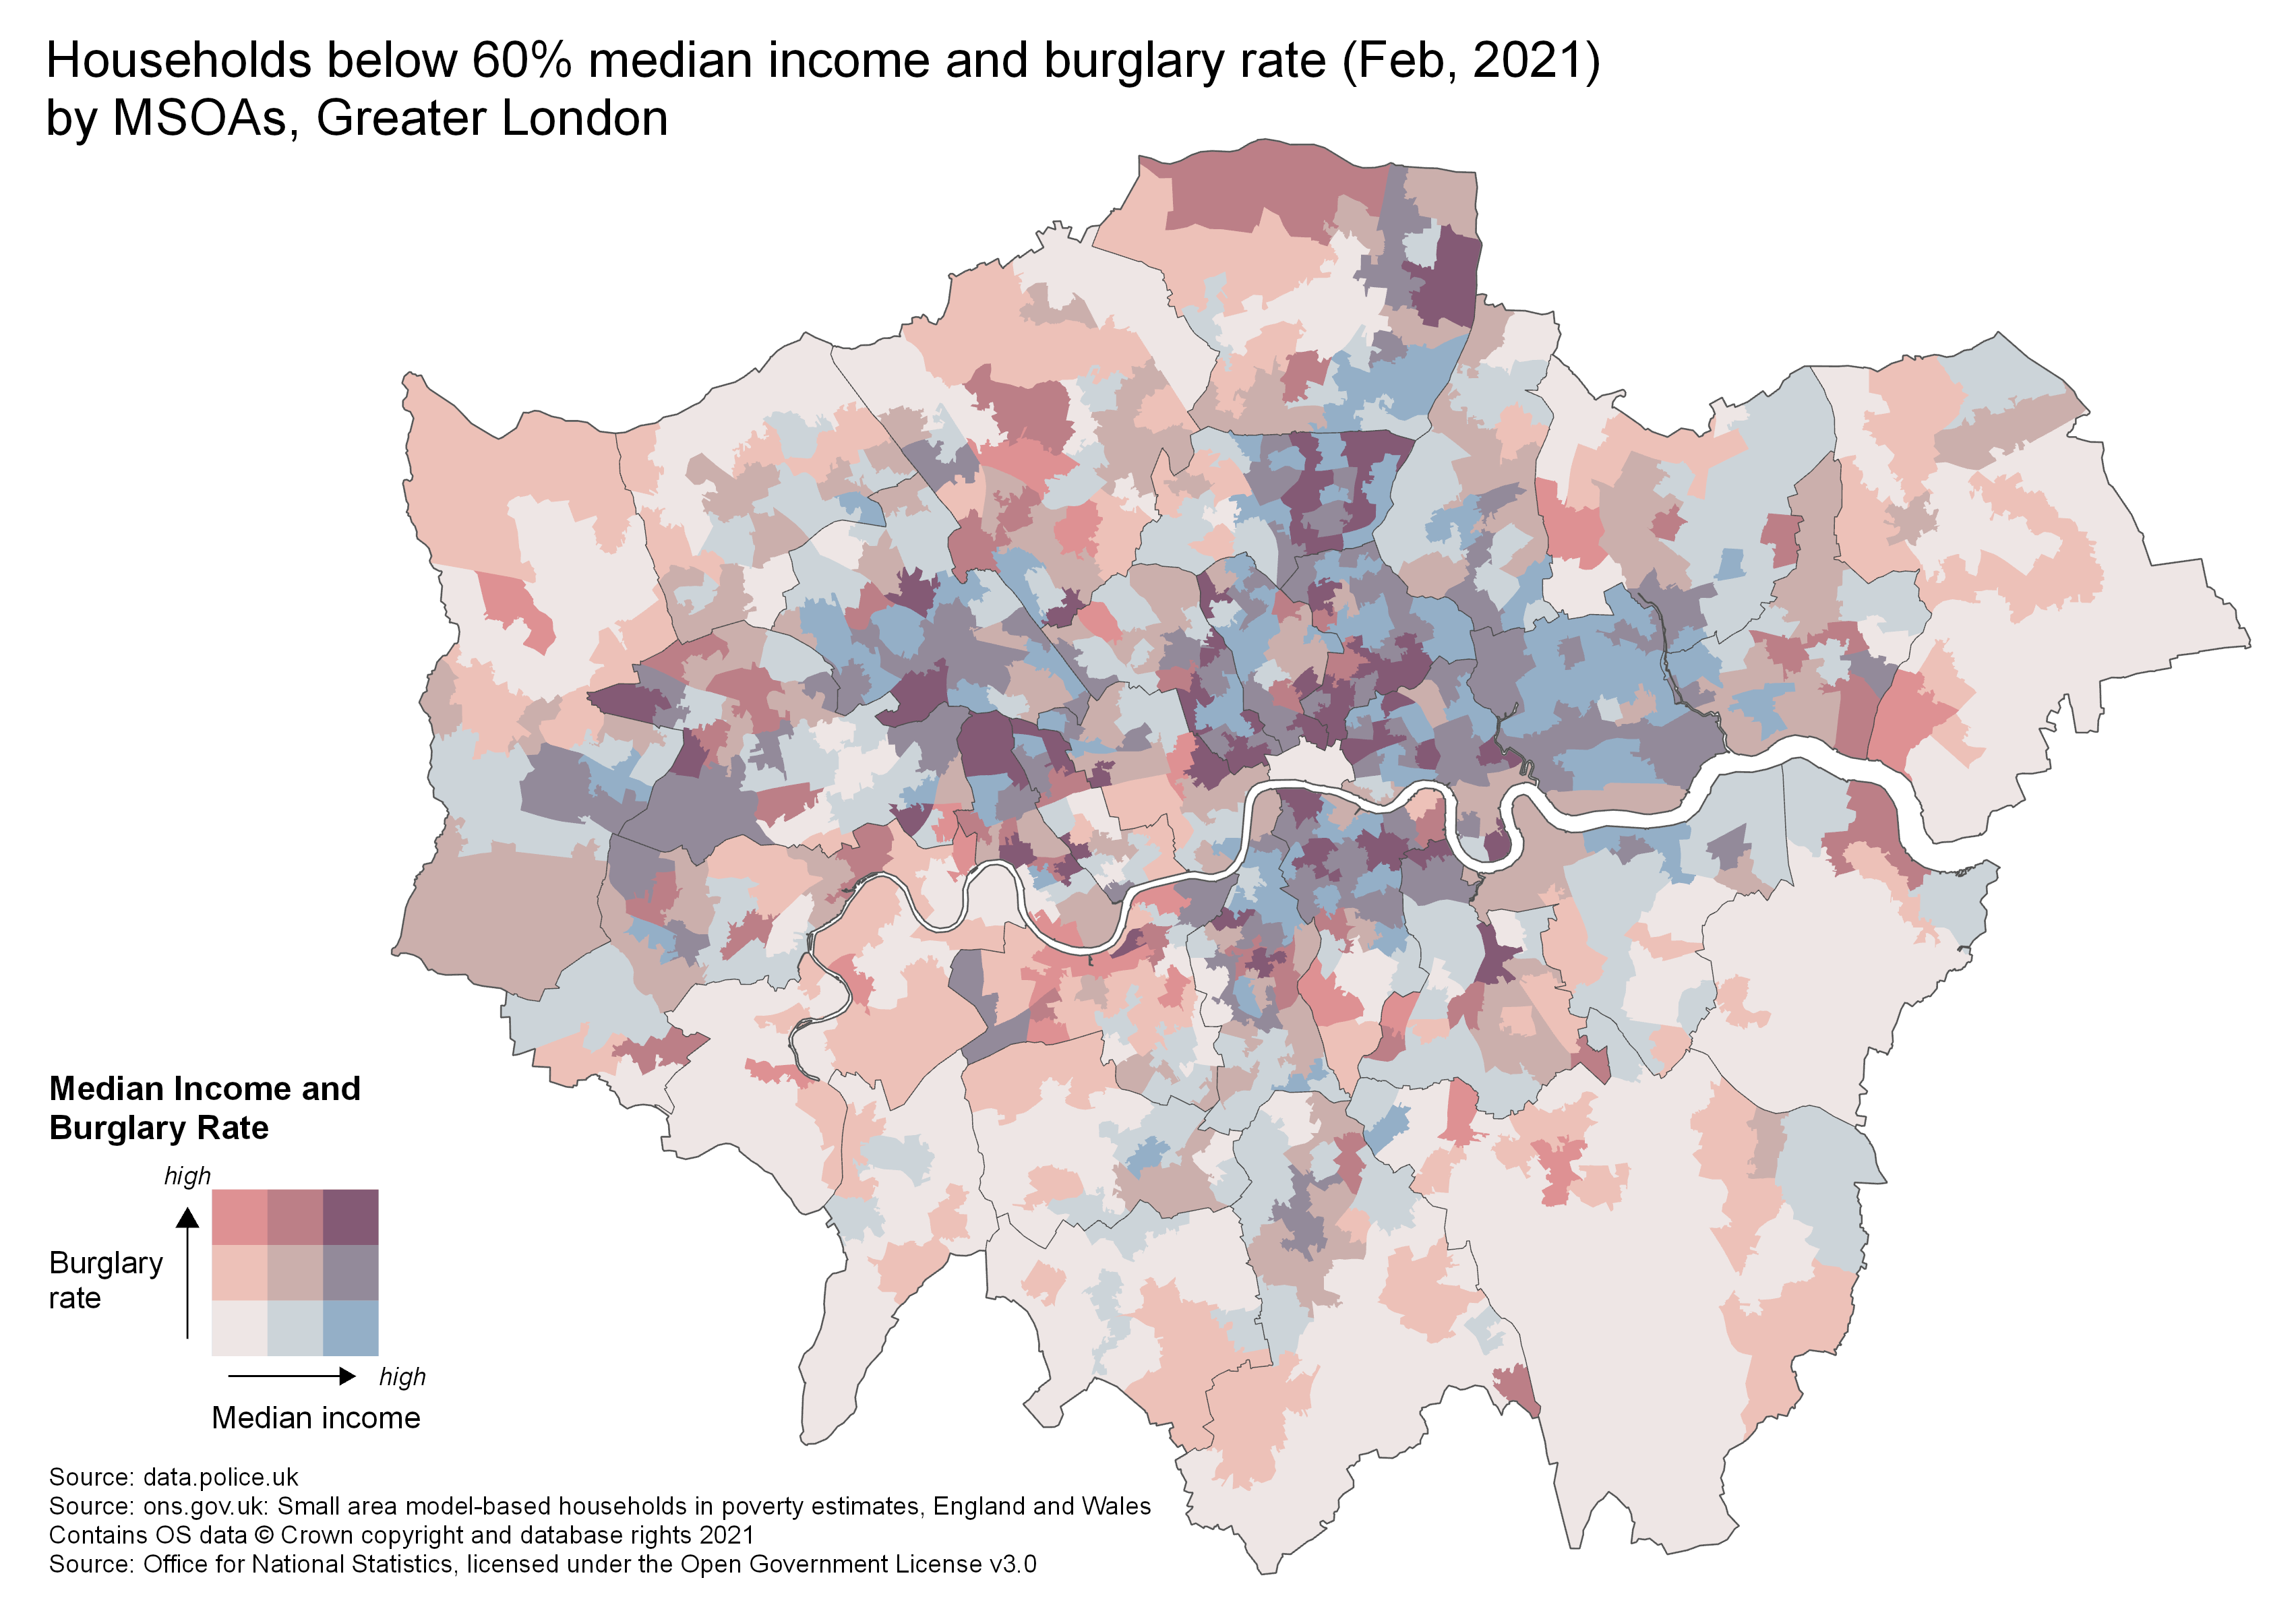 Bivariate map of London MSOAs showing Burglary rates vs median household income